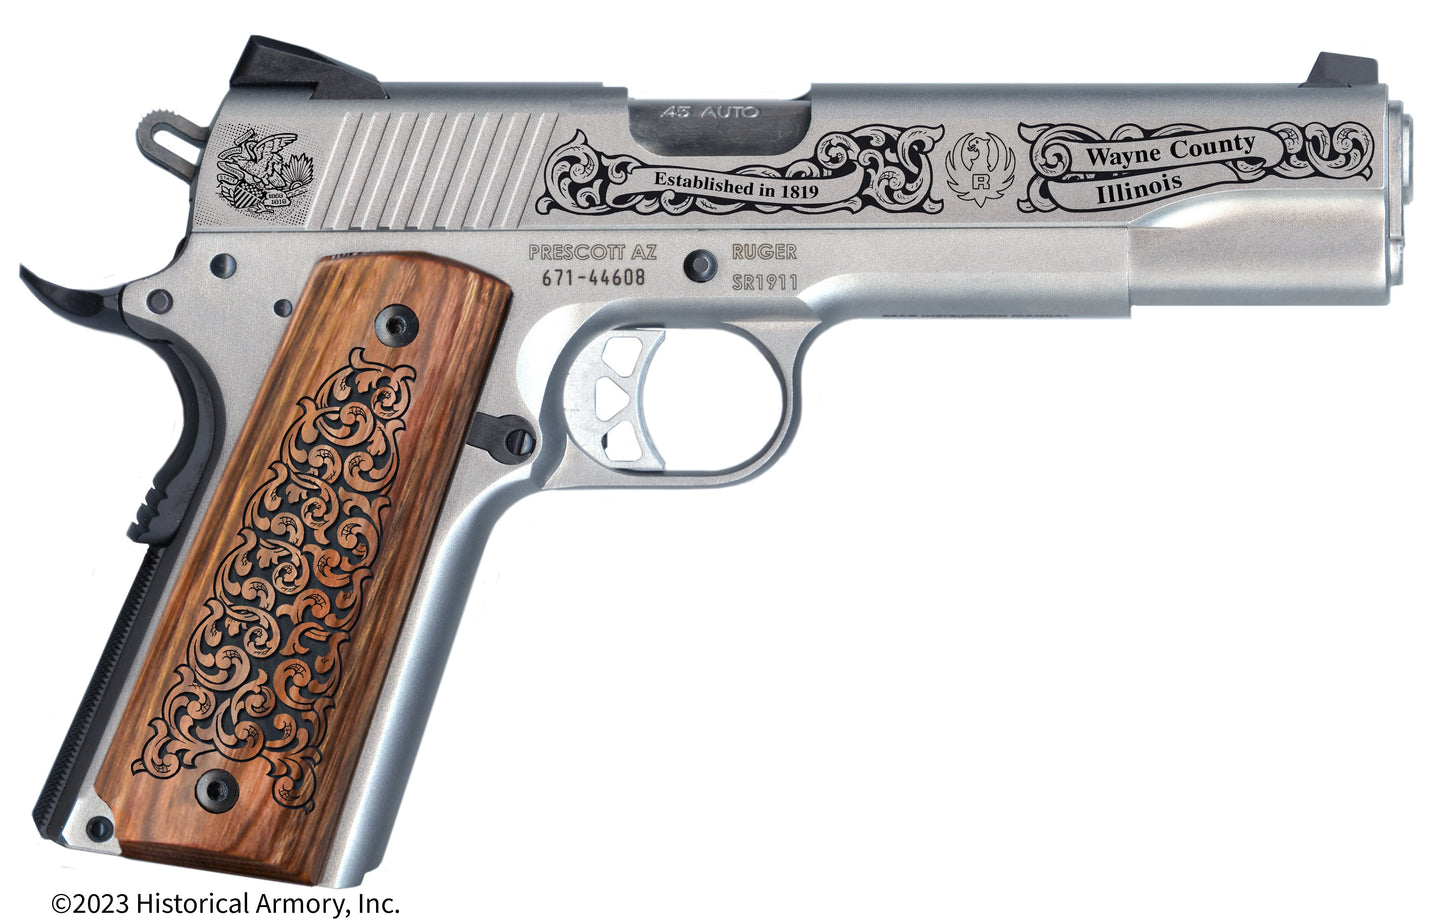 Wayne County Illinois Engraved .45 Auto Ruger 1911